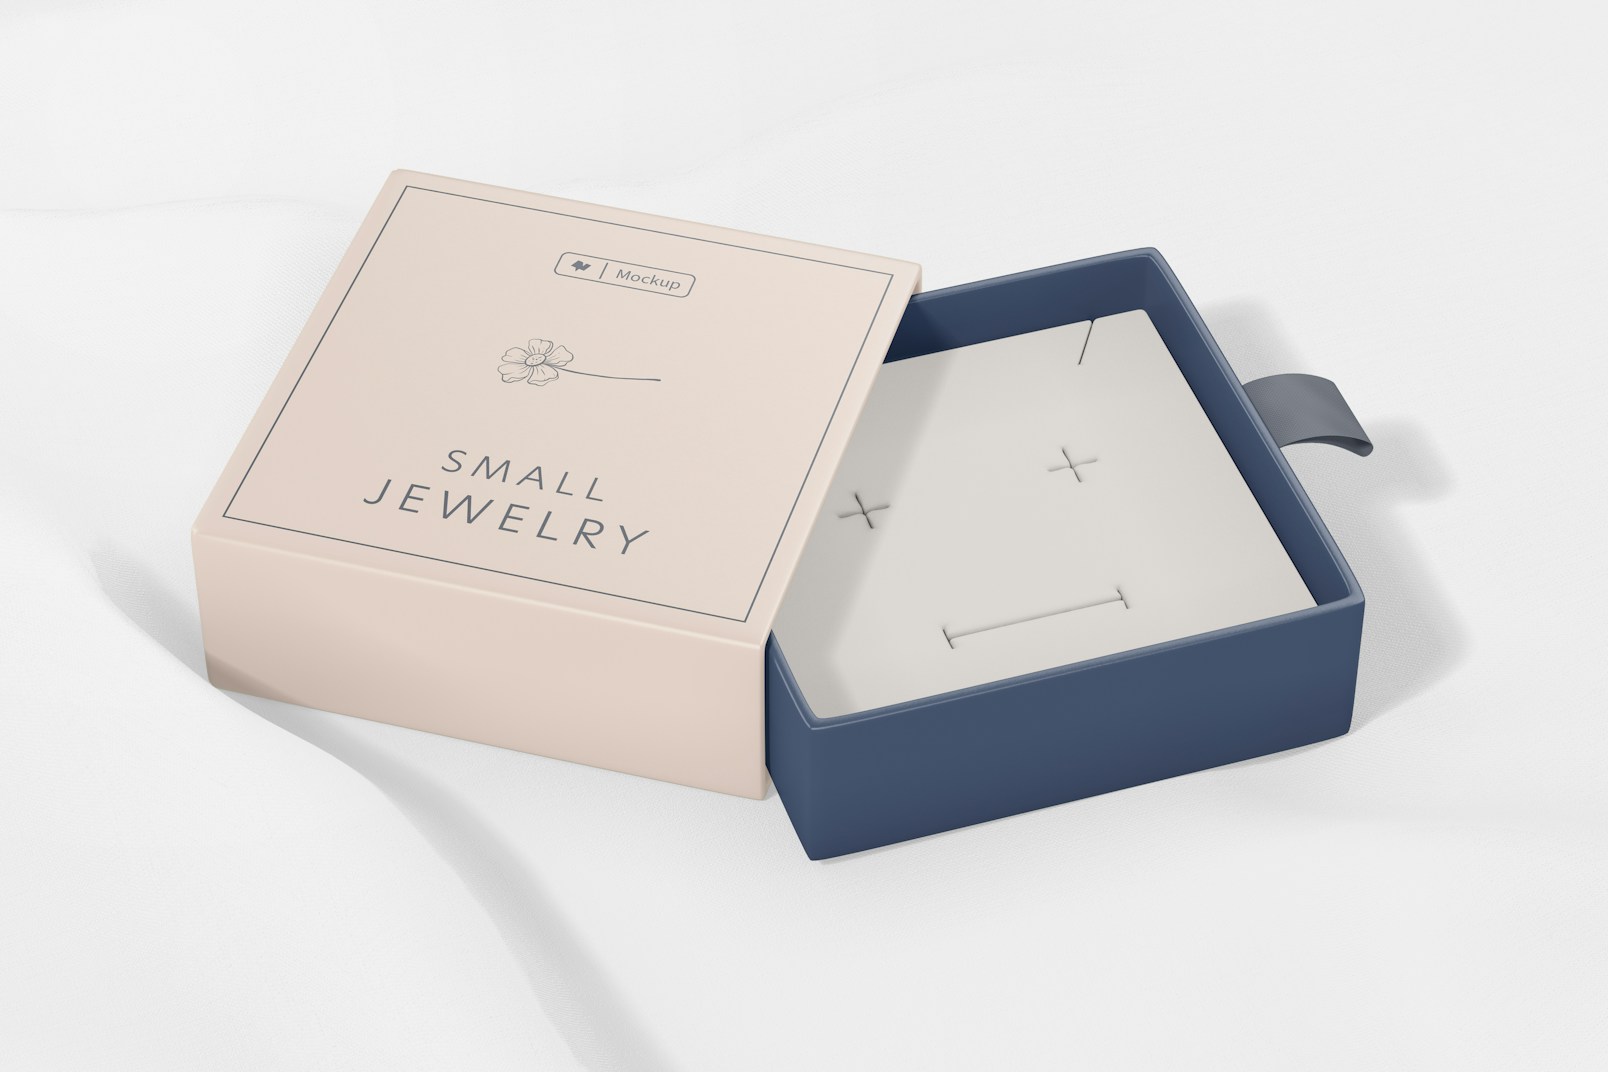 Small Jewelry Paper Box Mockup, Perspective